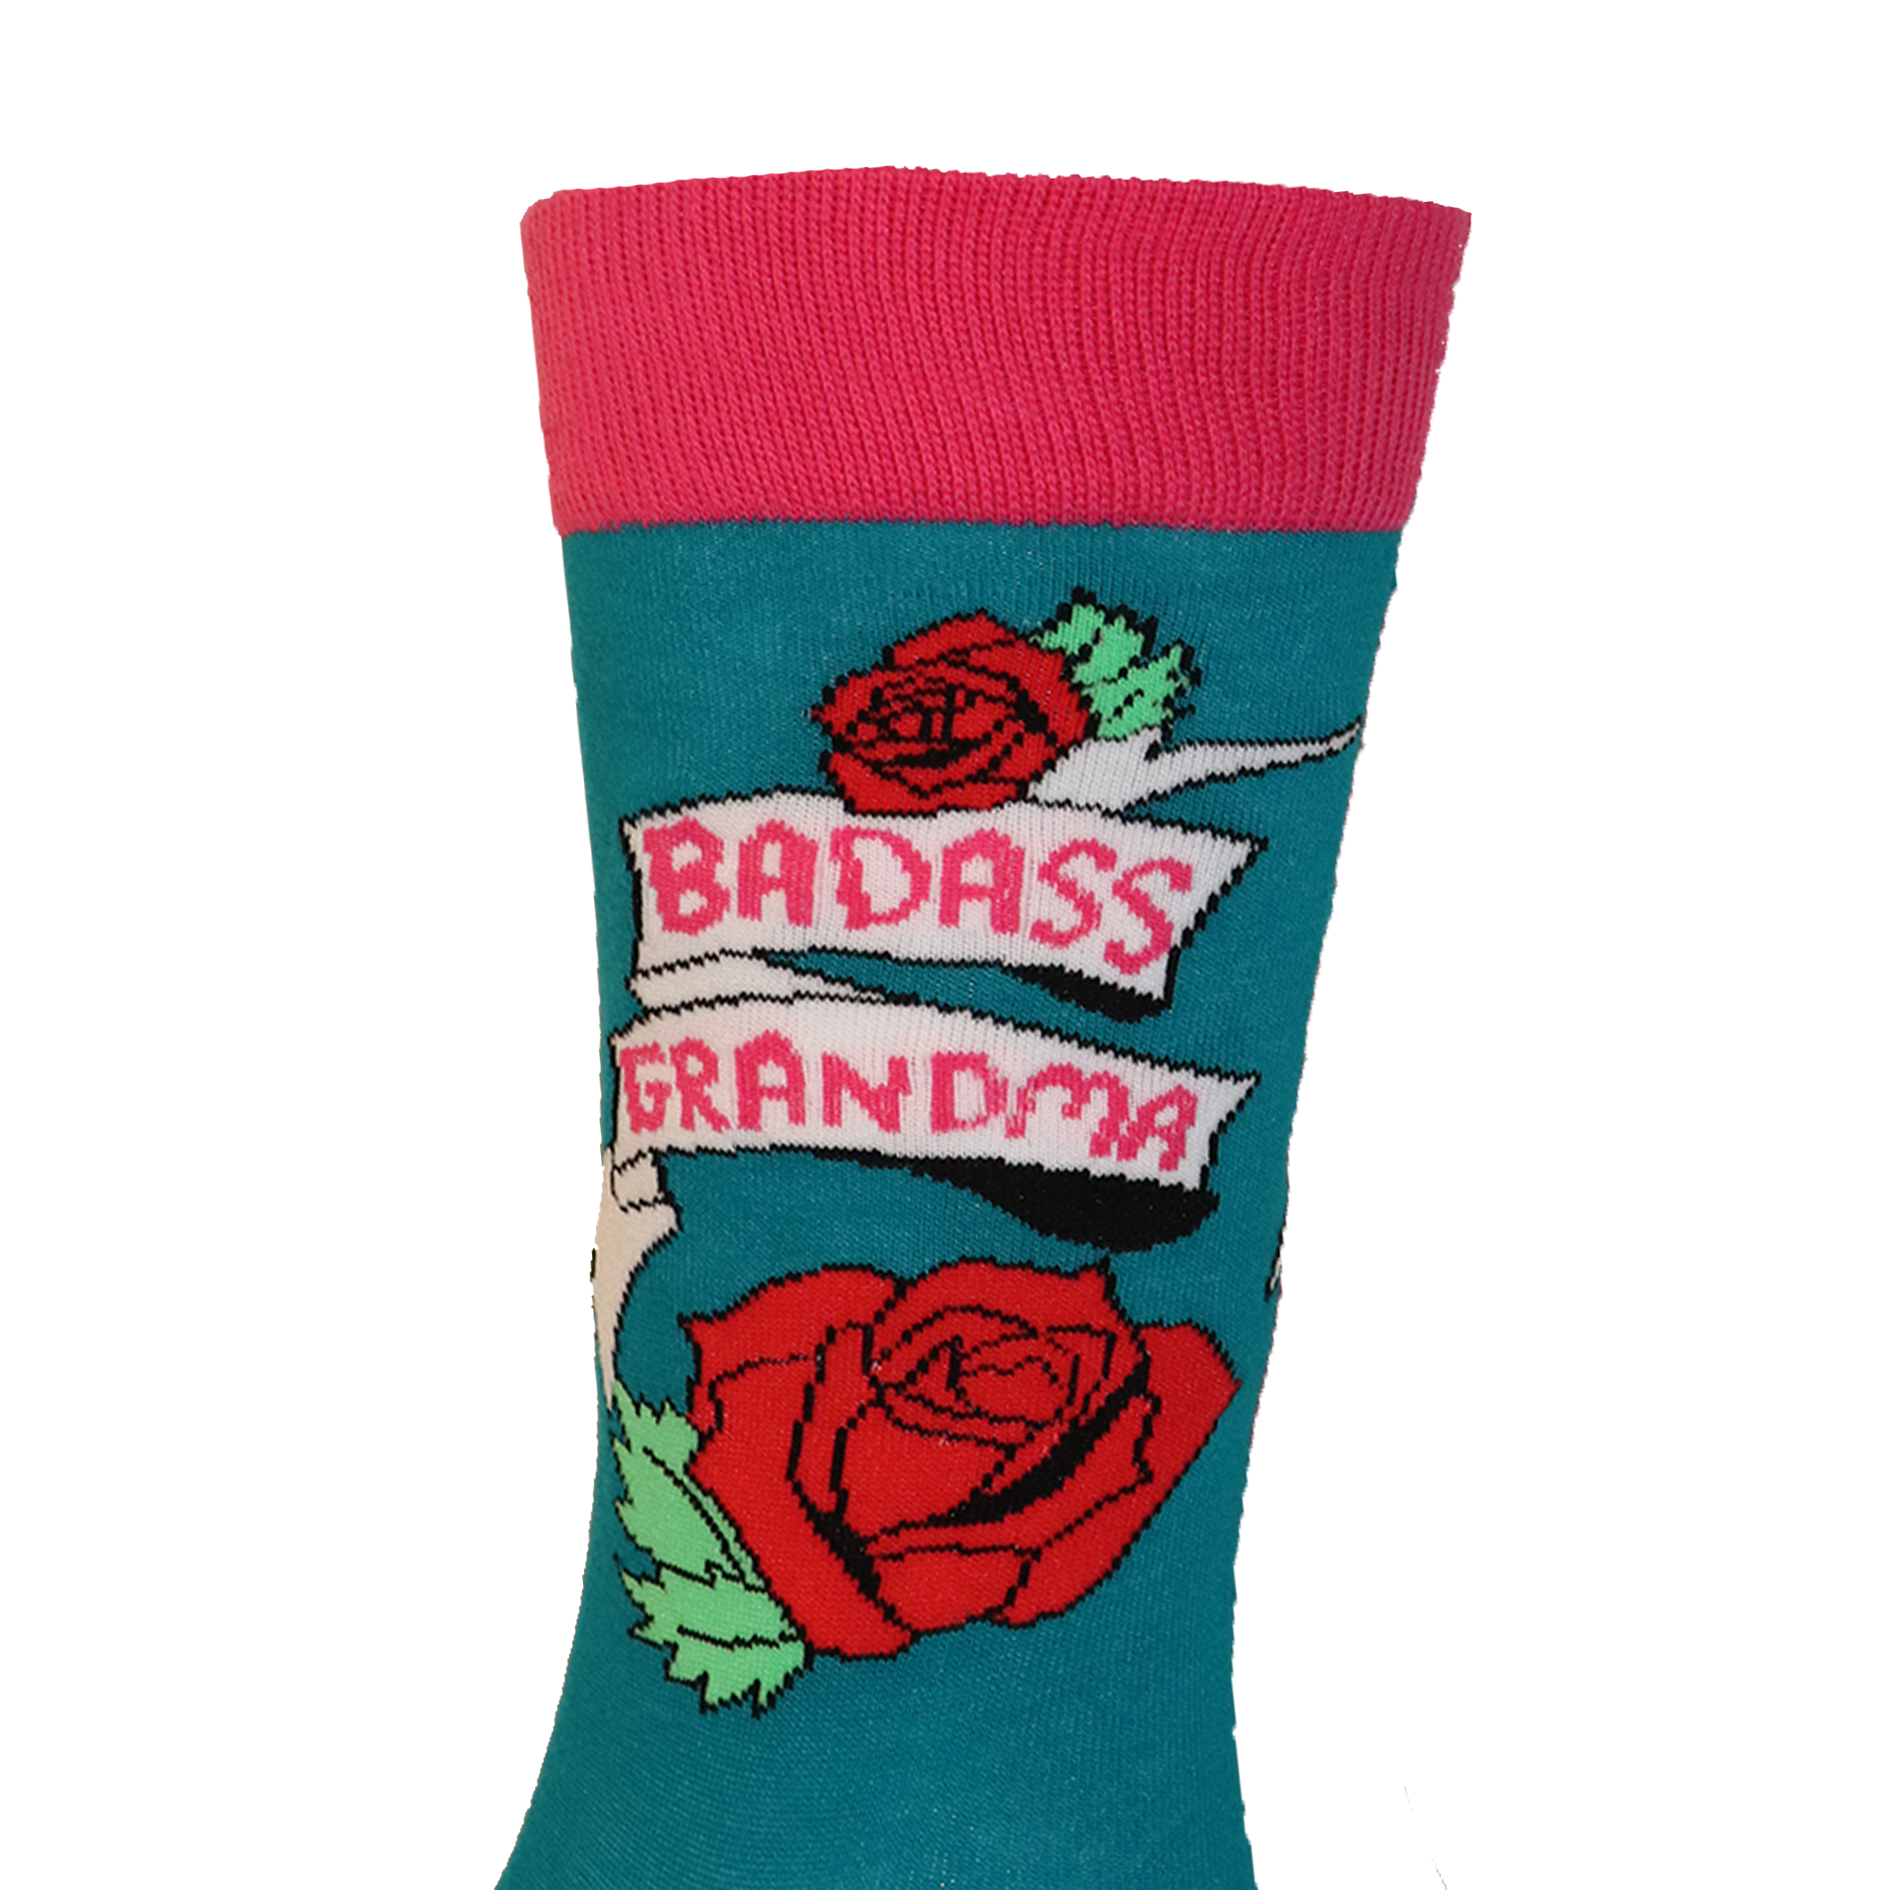 A pair of socks depicting red roses. Baddass Grandma text. Teal legs, red cuff and, heel and toe. Top of sock.